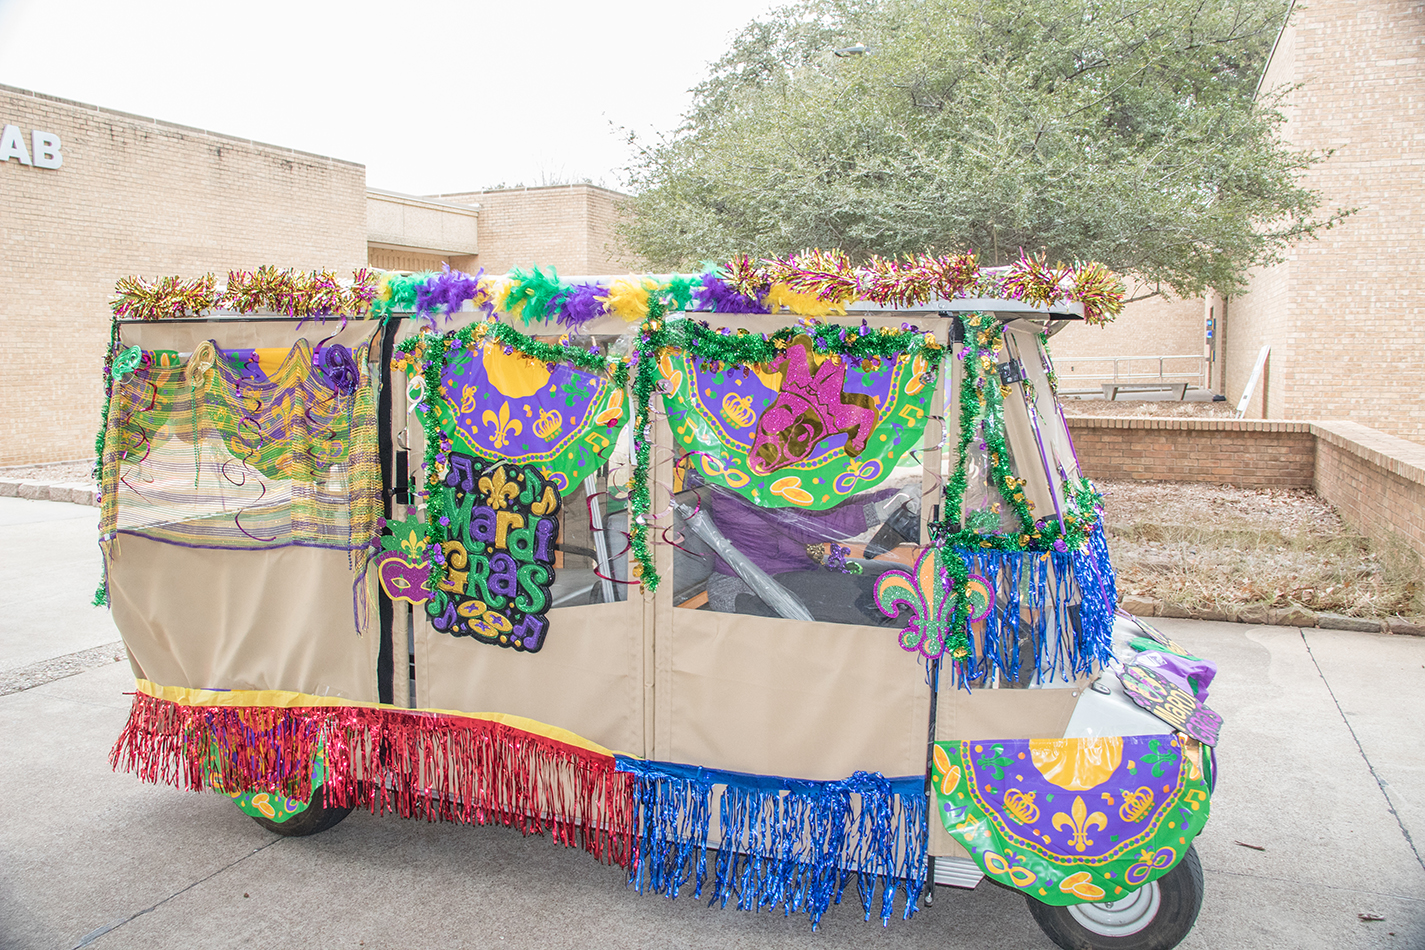 NE student activities shows off its custom-made float for the Mardi Gras parade that crossed the campus Feb. 13. The parade has become an annual tradition on campus.